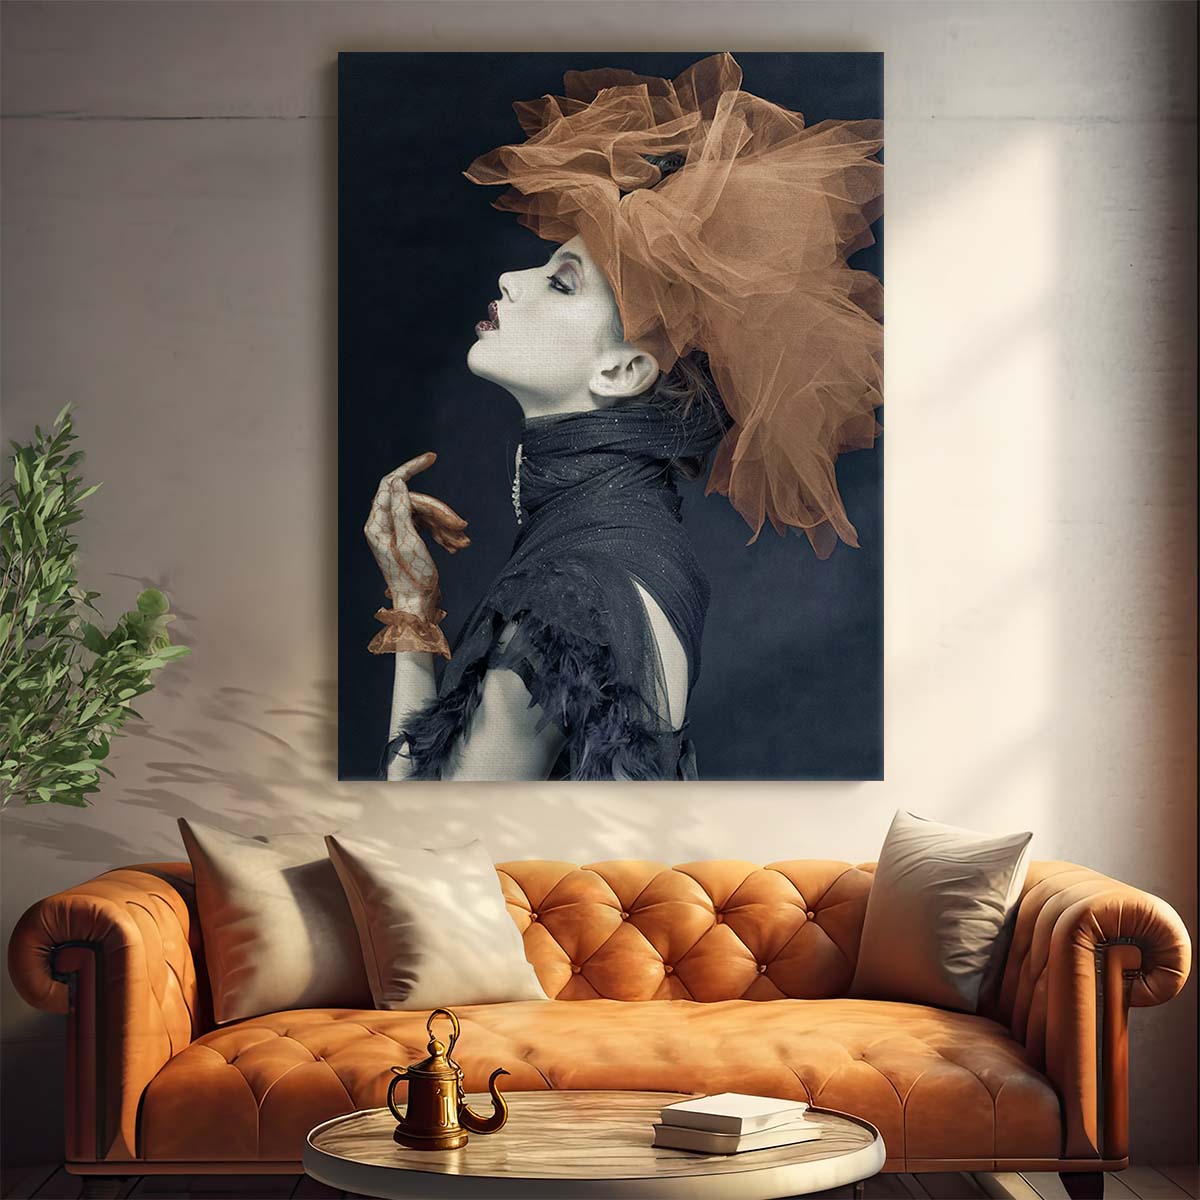 Fashion Model Woman Portrait Photography with Silk Accents by Luxuriance Designs, made in USA